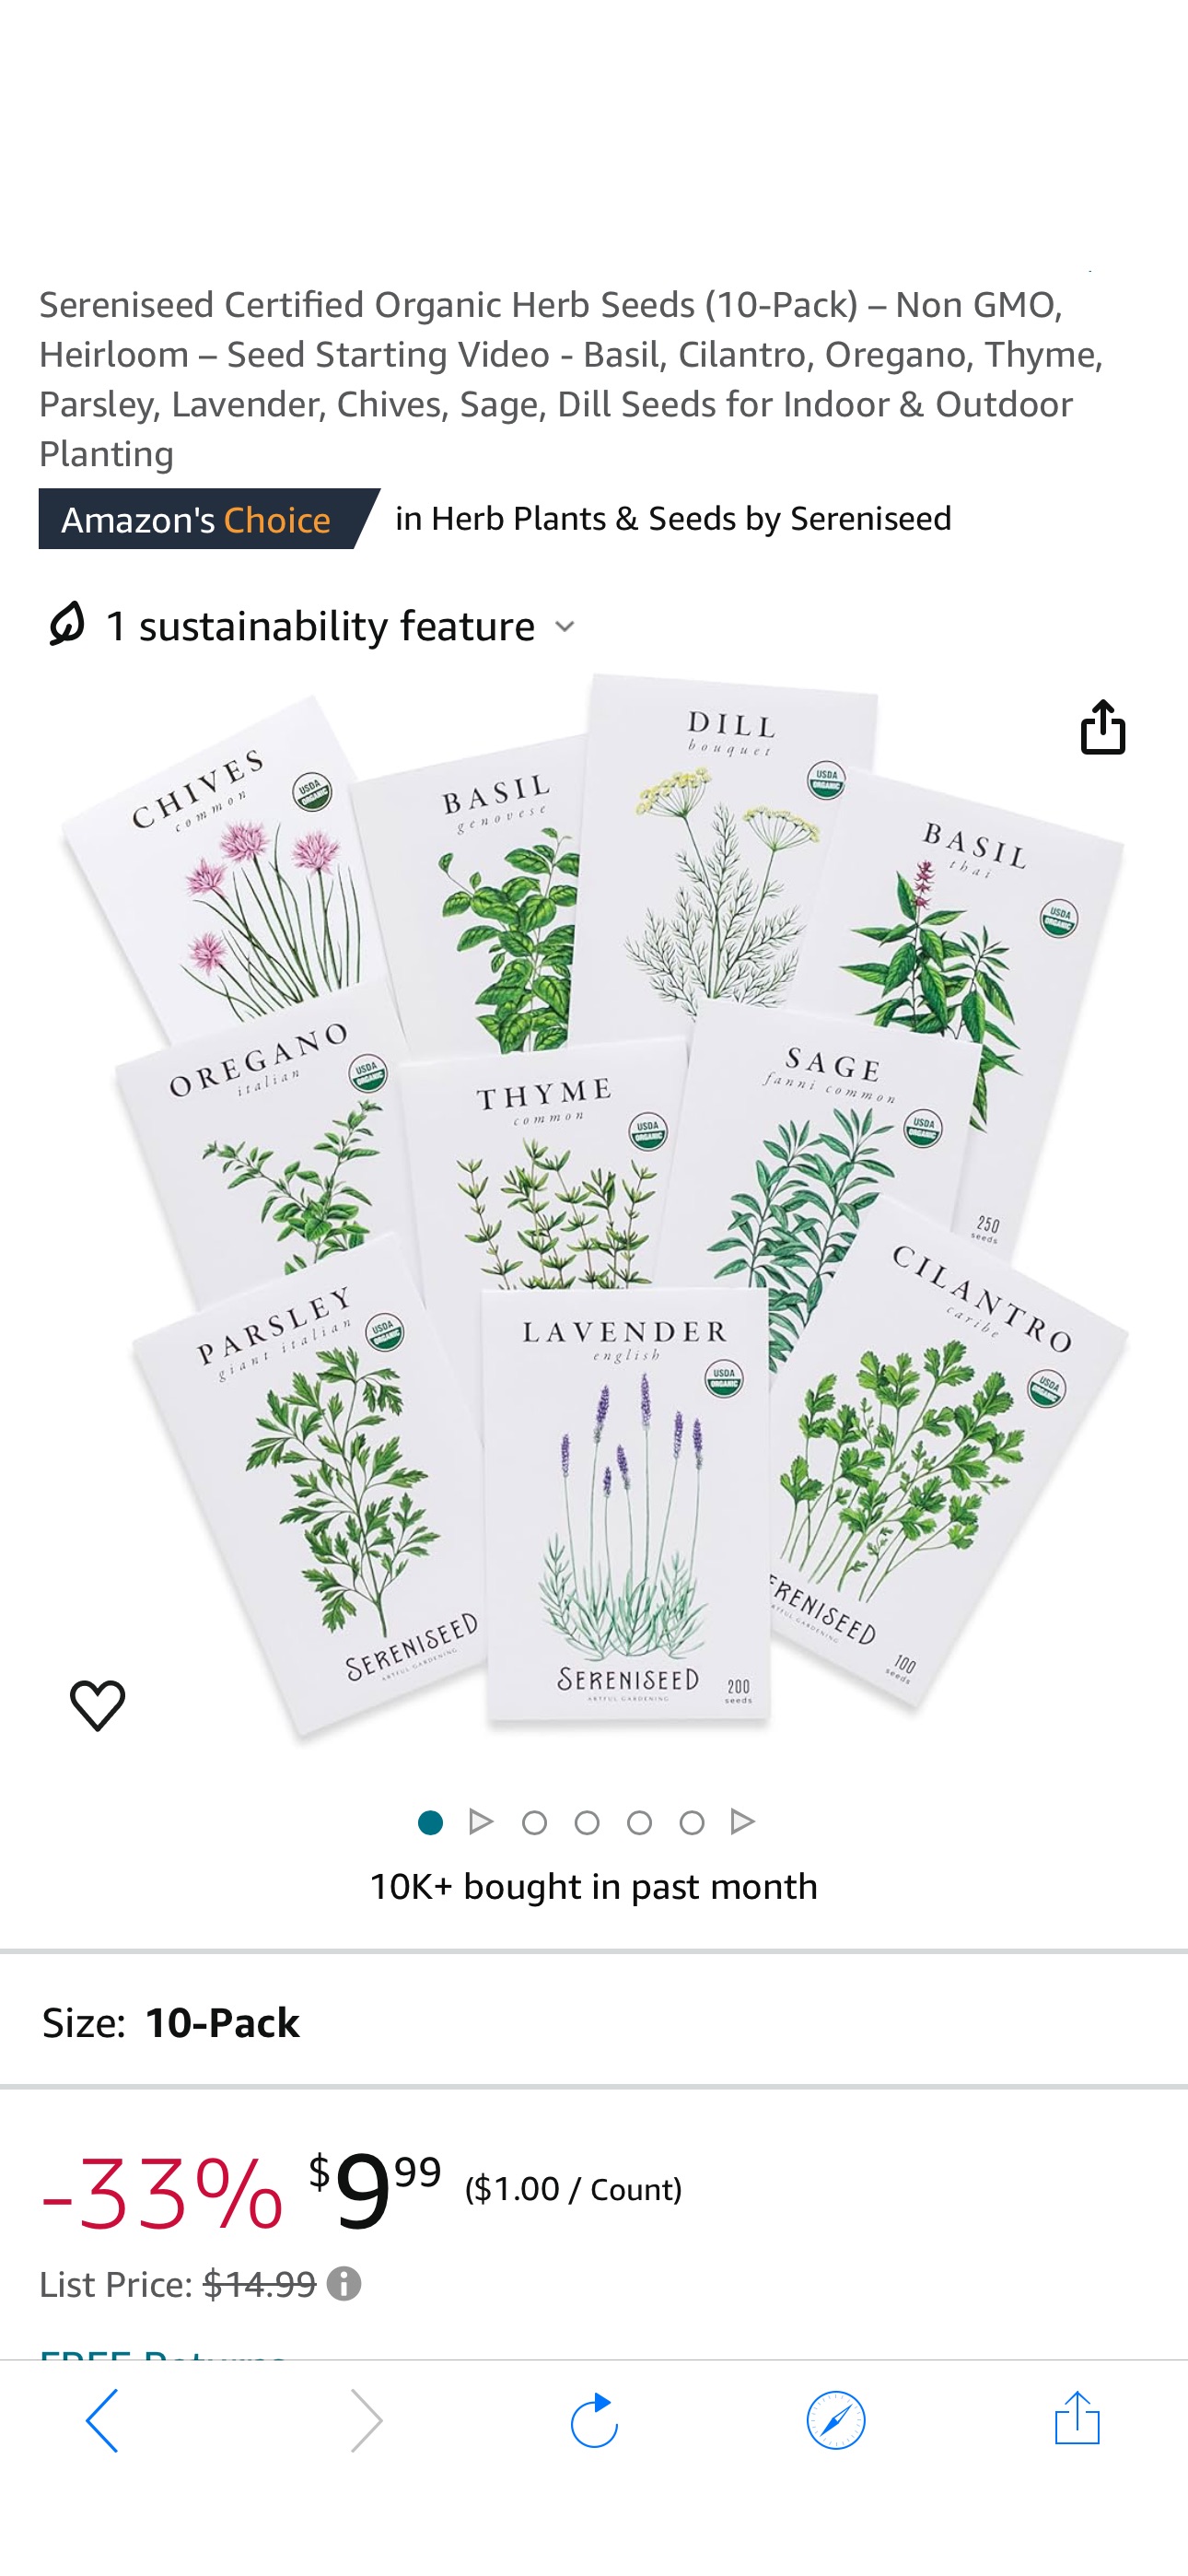 Amazon.com : Sereniseed Certified Organic Herb Seeds (10-Pack) – Non GMO, Heirloom – Seed Starting Video - Basil, Cilantro, Oregano, Thyme, Parsley, Lavender, Chives, Sage, Dill Seeds for Indoor & Out